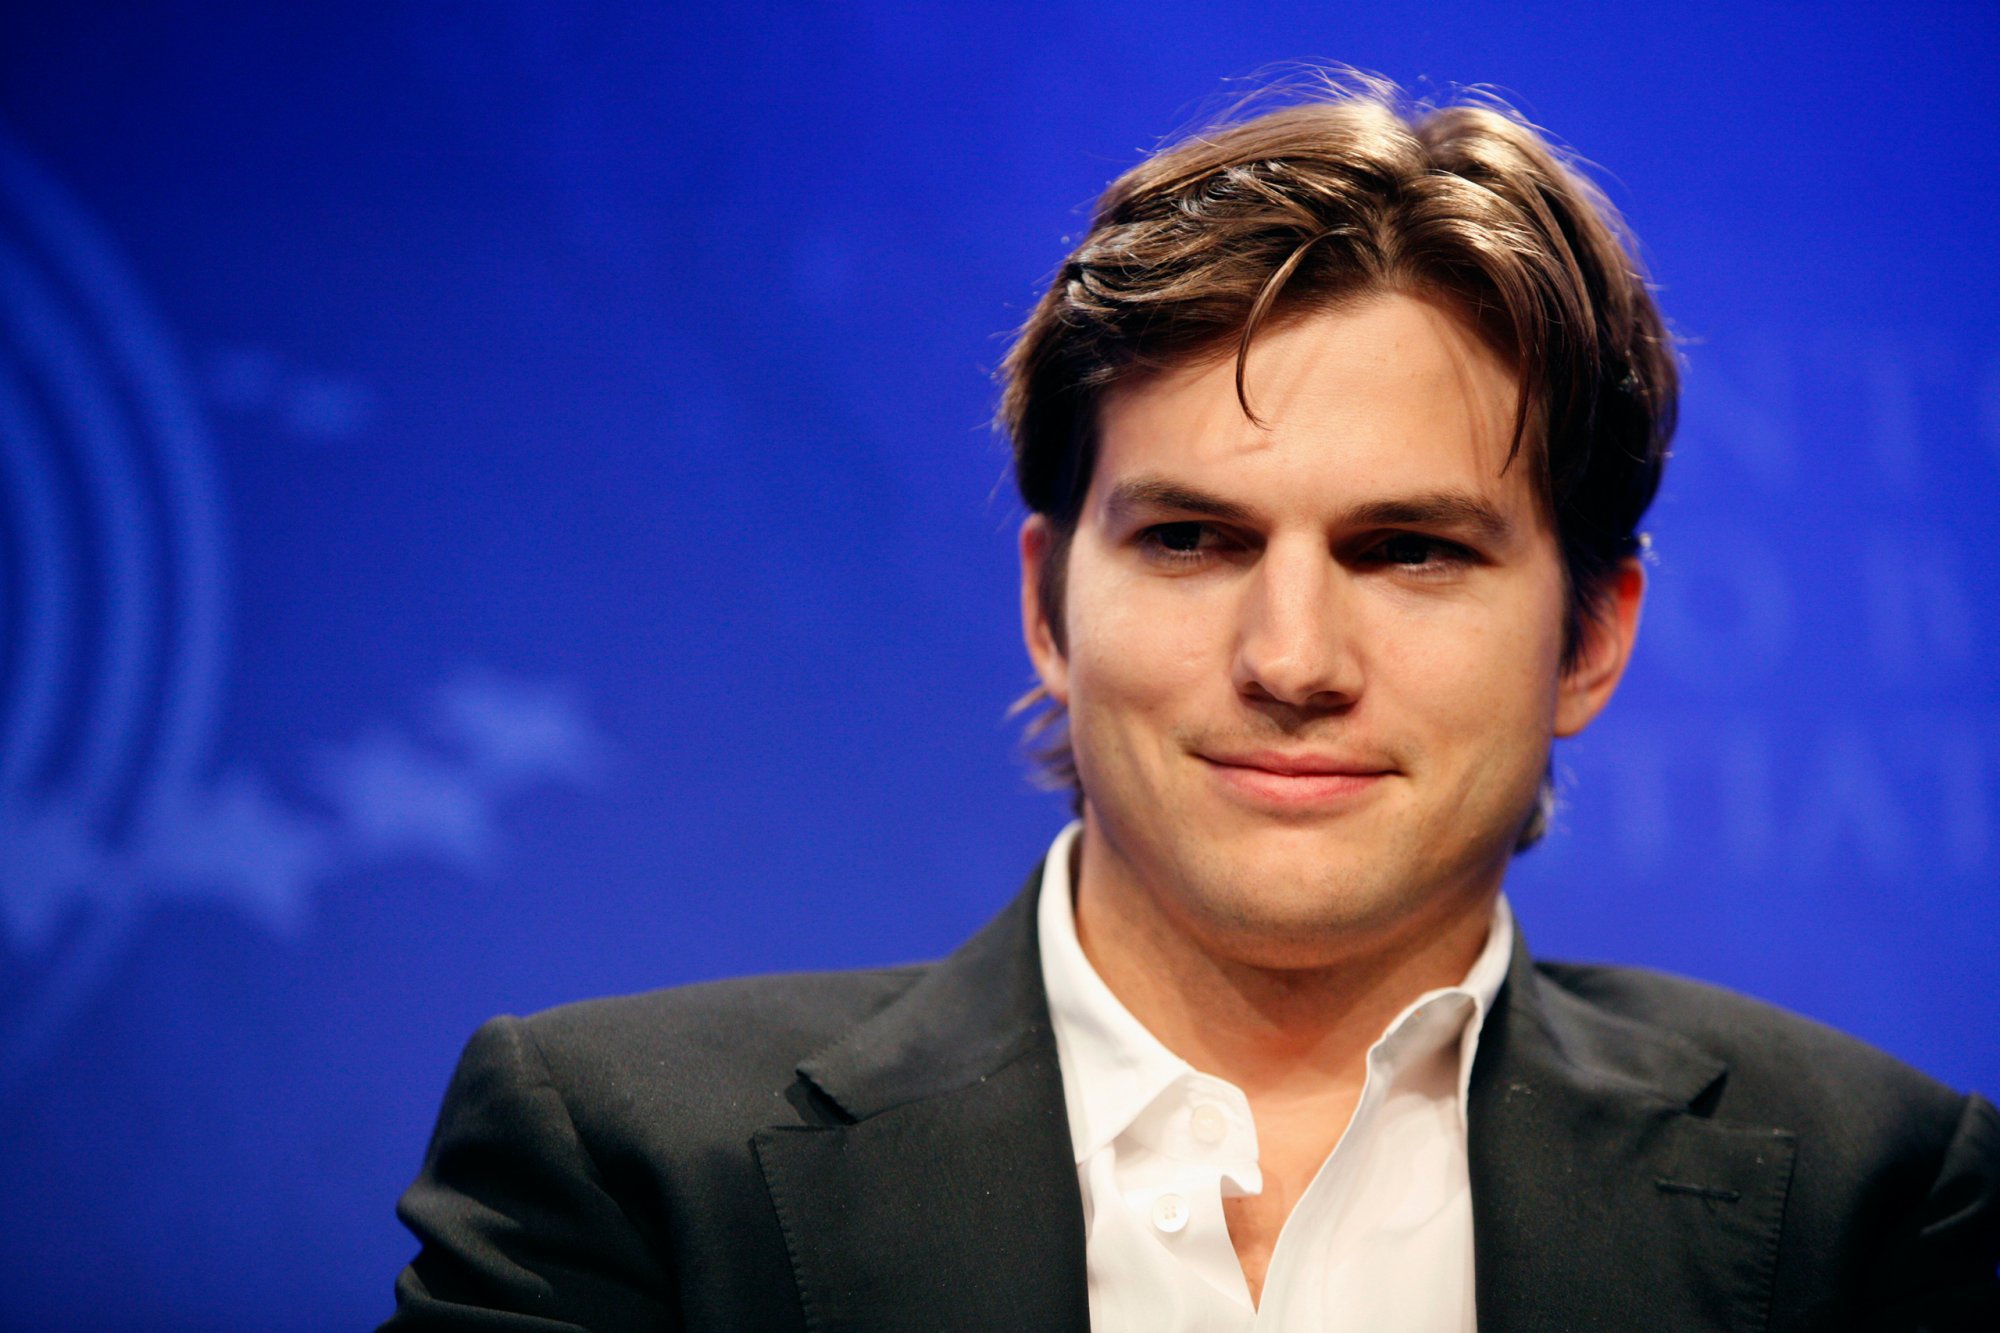 Ashton Kutcher Wallpapers Images Photos Pictures Backgrounds